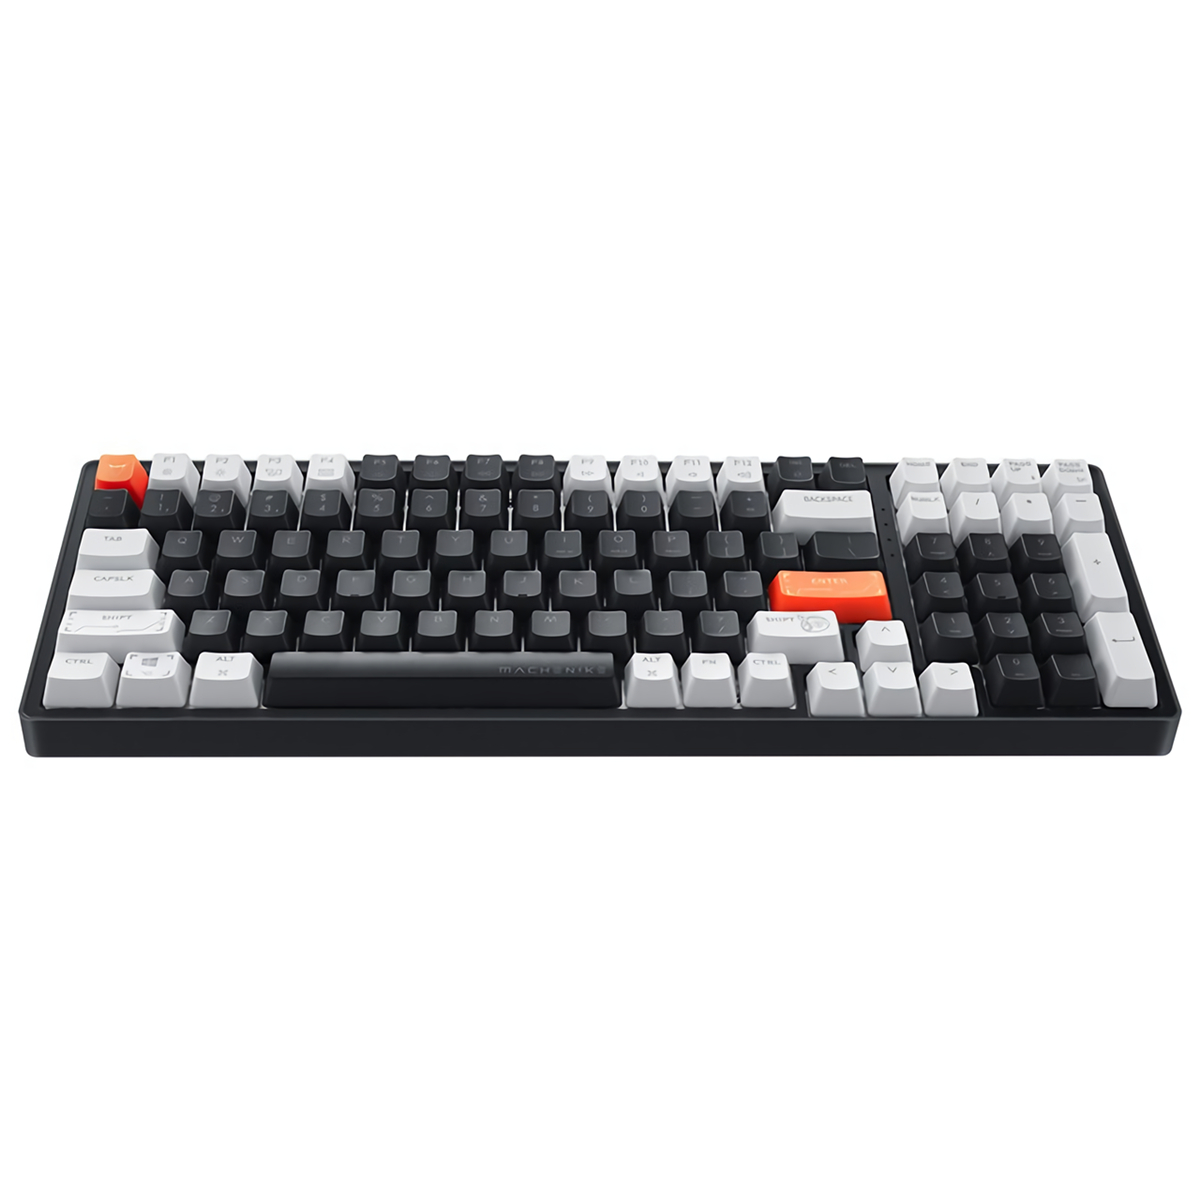 Find MACHENIKE K600 Mechanical Gaming Keyboard Dual Mode Type-C Wired bluetooth5.0 100 Keys Translucent ABS Keycaps Kailh Blue/Brown/Red Switch White LED Backlit Ergonomic Keyboard for Sale on Gipsybee.com with cryptocurrencies